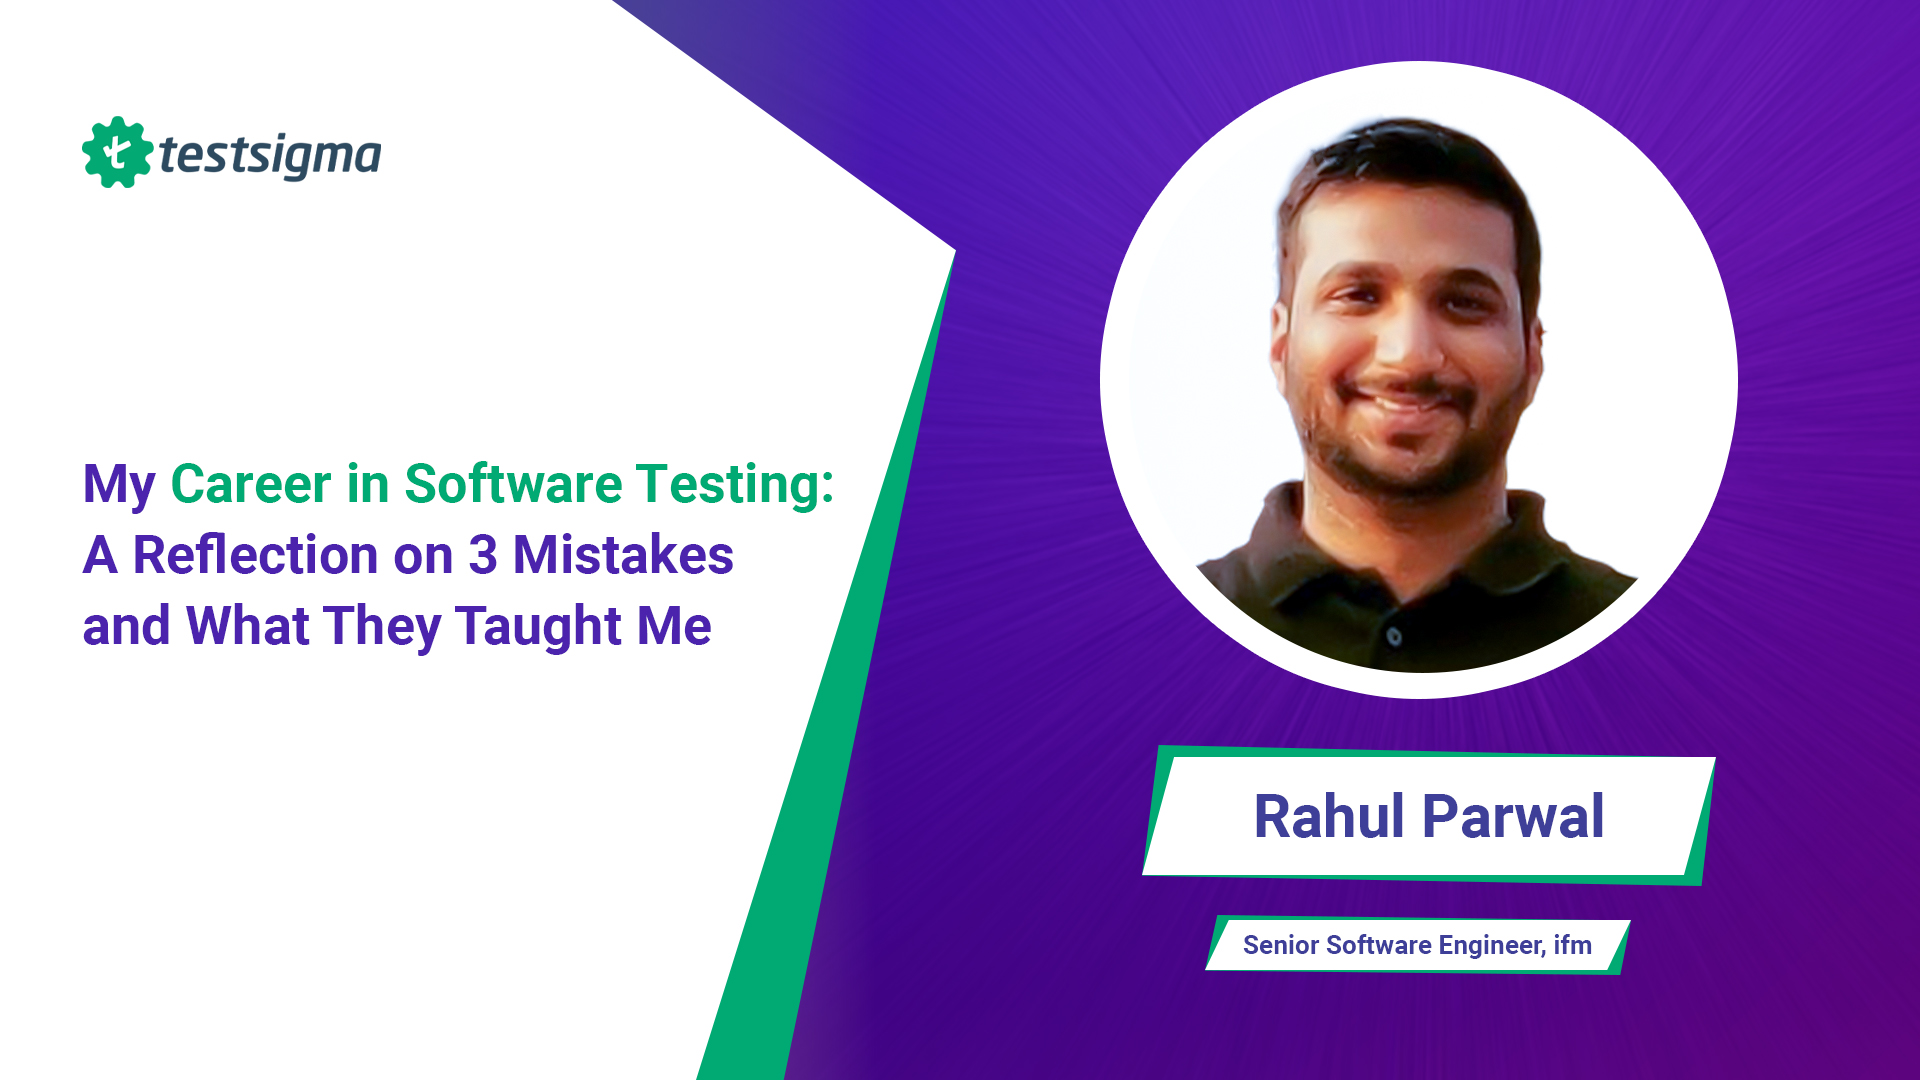 My Career in Software Testing A Reflection on 3 Mistakes and What They Taught Me